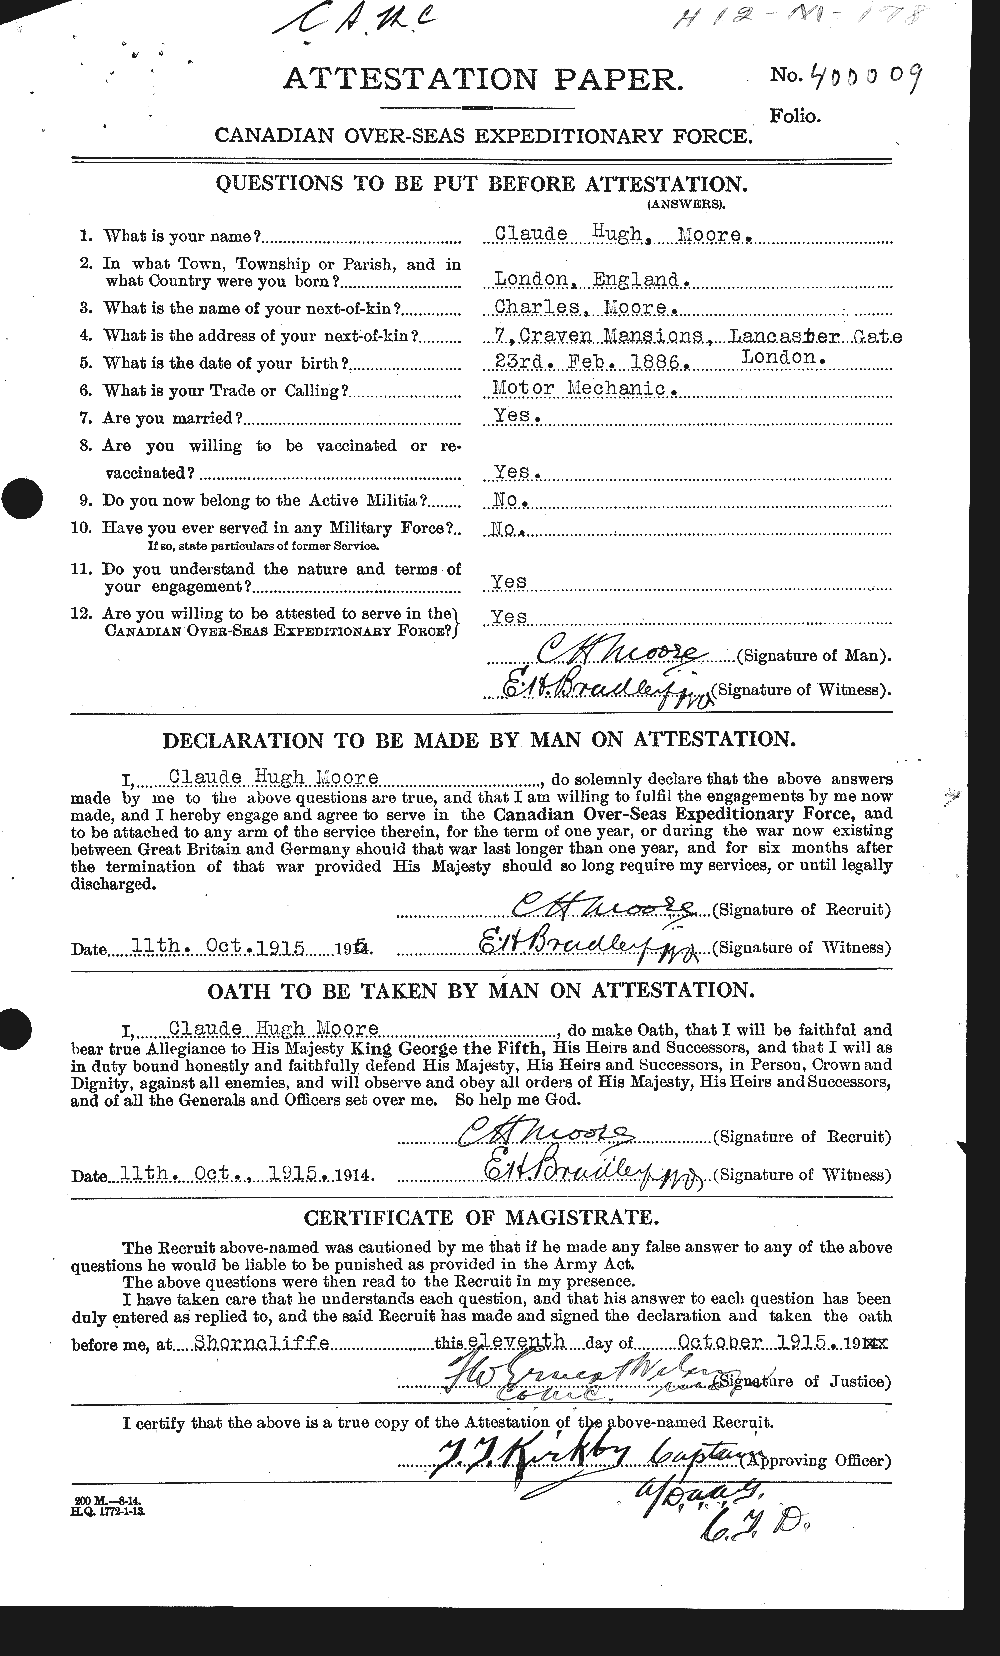 Personnel Records of the First World War - CEF 506539a